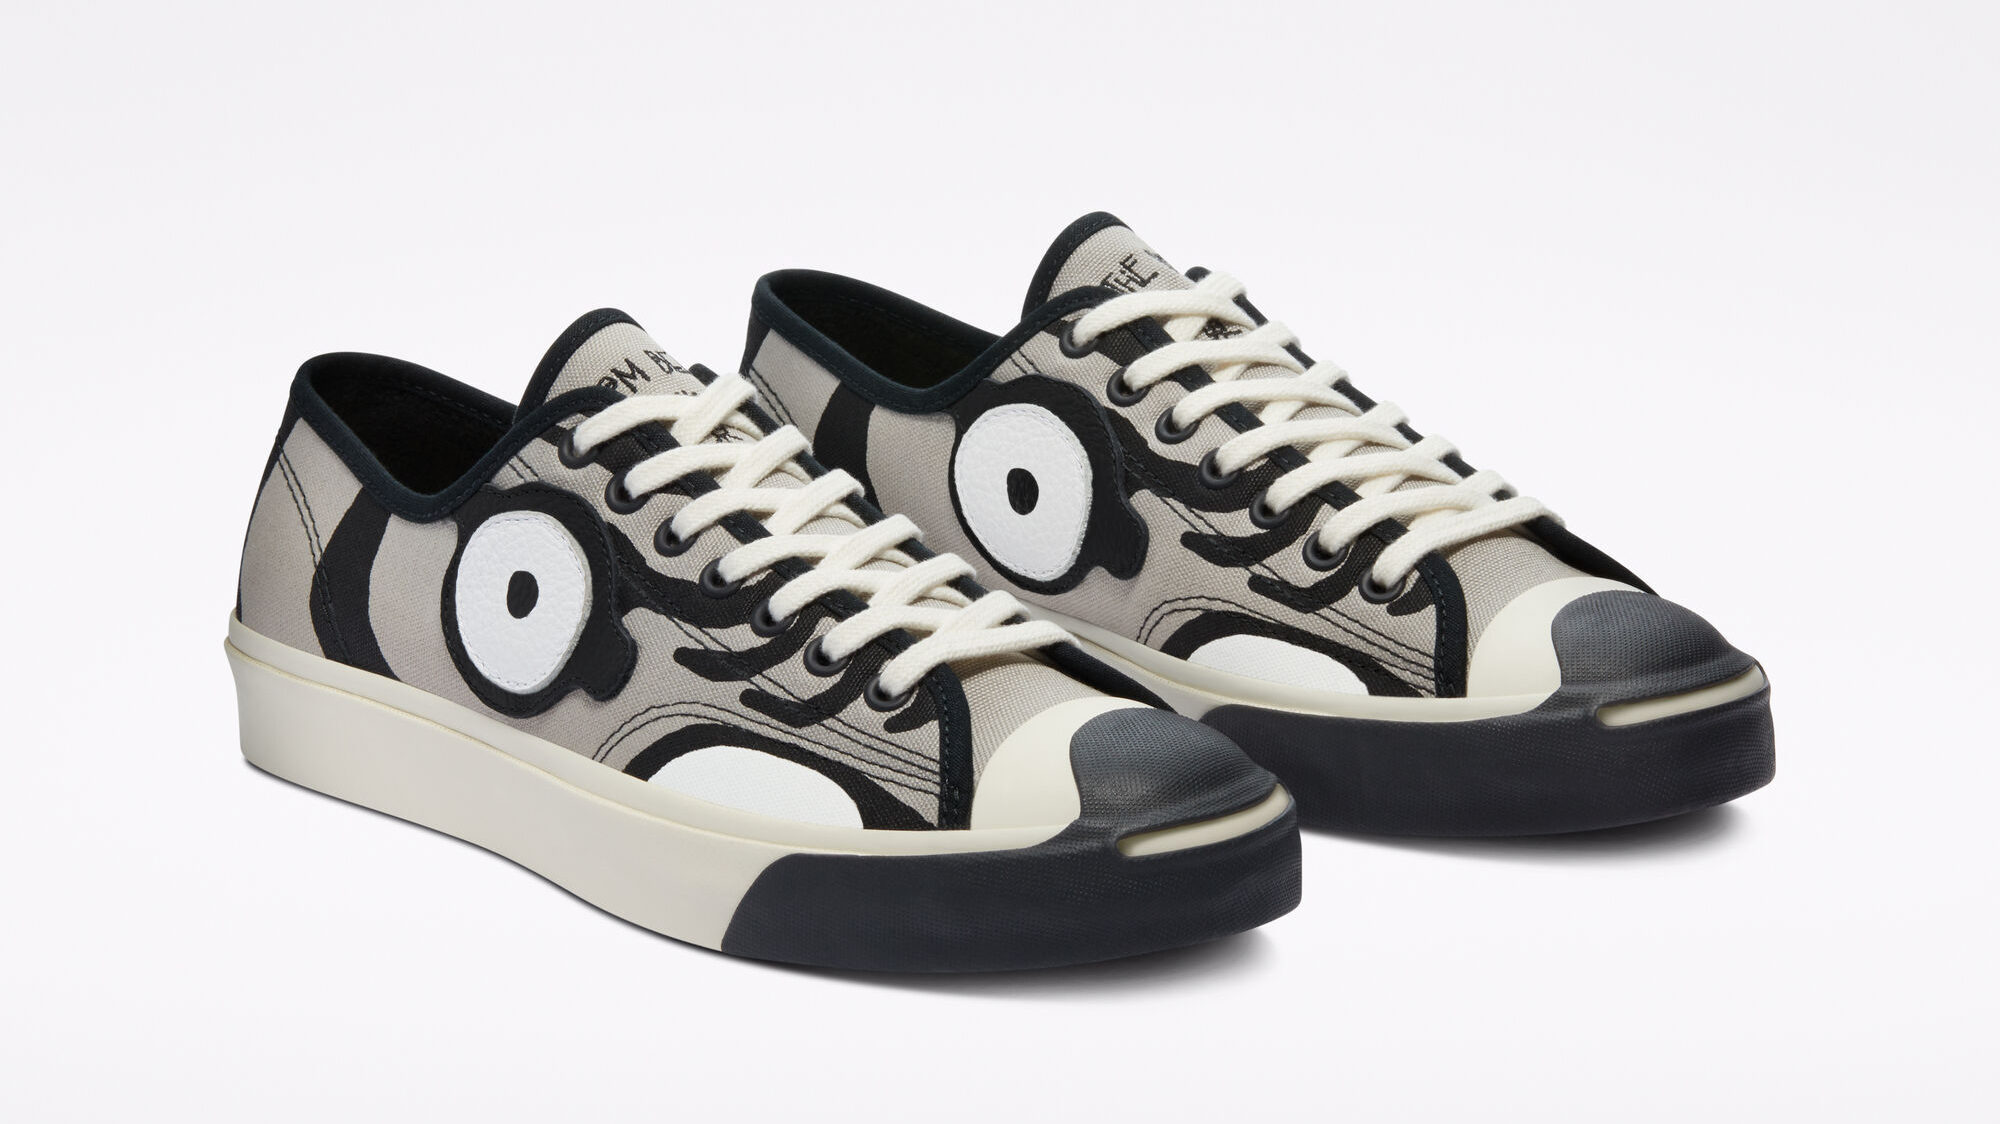 Limited Edition Converse x SOULGOODS Jack Purcell